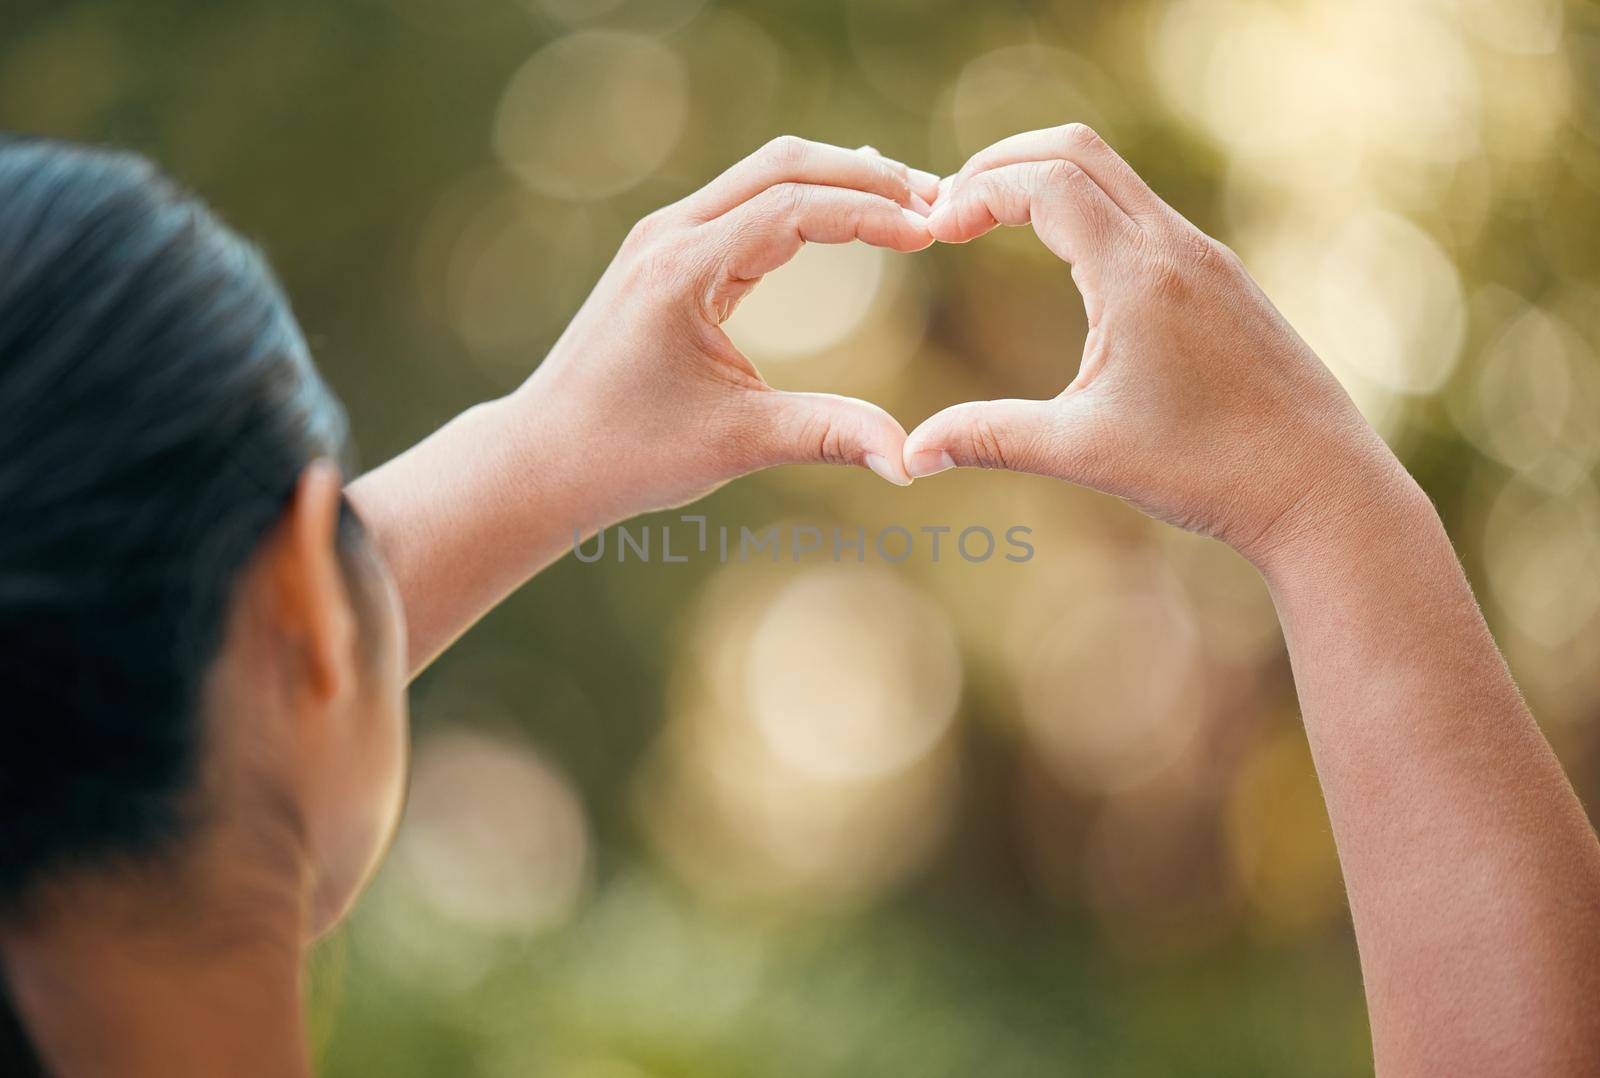 Woman use hands, make heart or love sign outside with bokeh in nature background. Lady with fingers together, show icon or expression of romance against outdoor backdrop with blurred natural light.